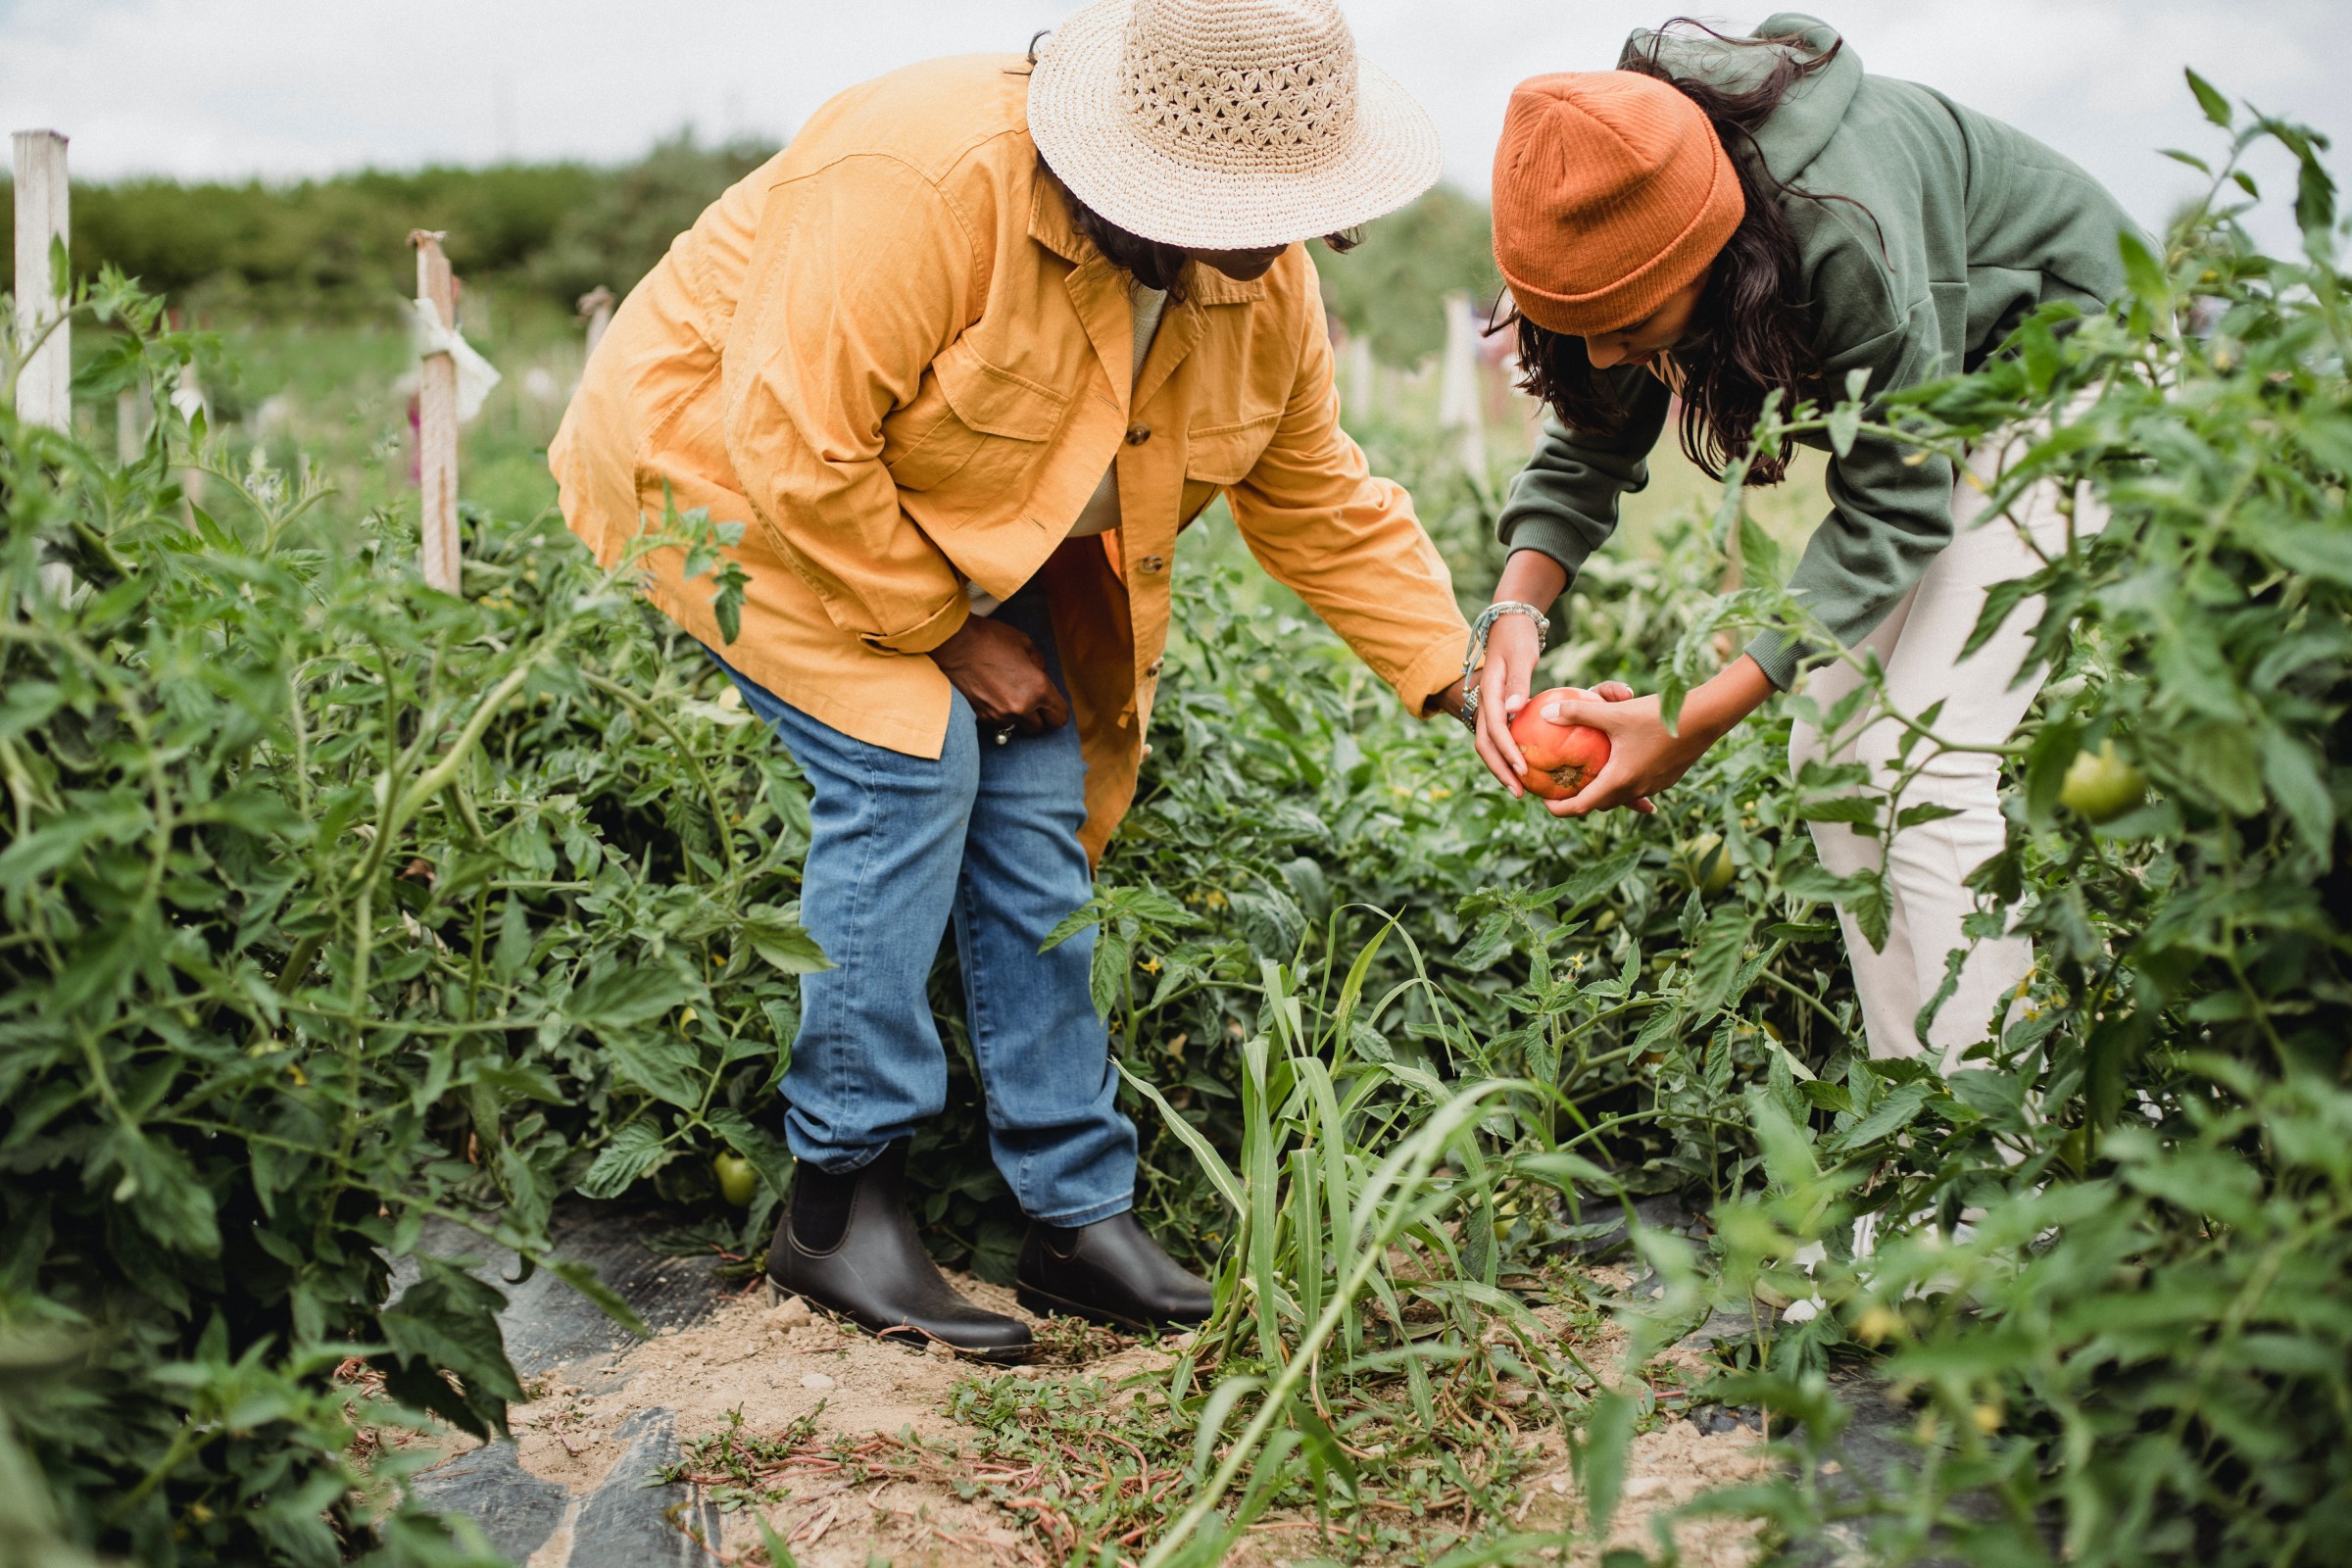 Image of two people gardening; provided by https://www.pexels.com/@zen-chung